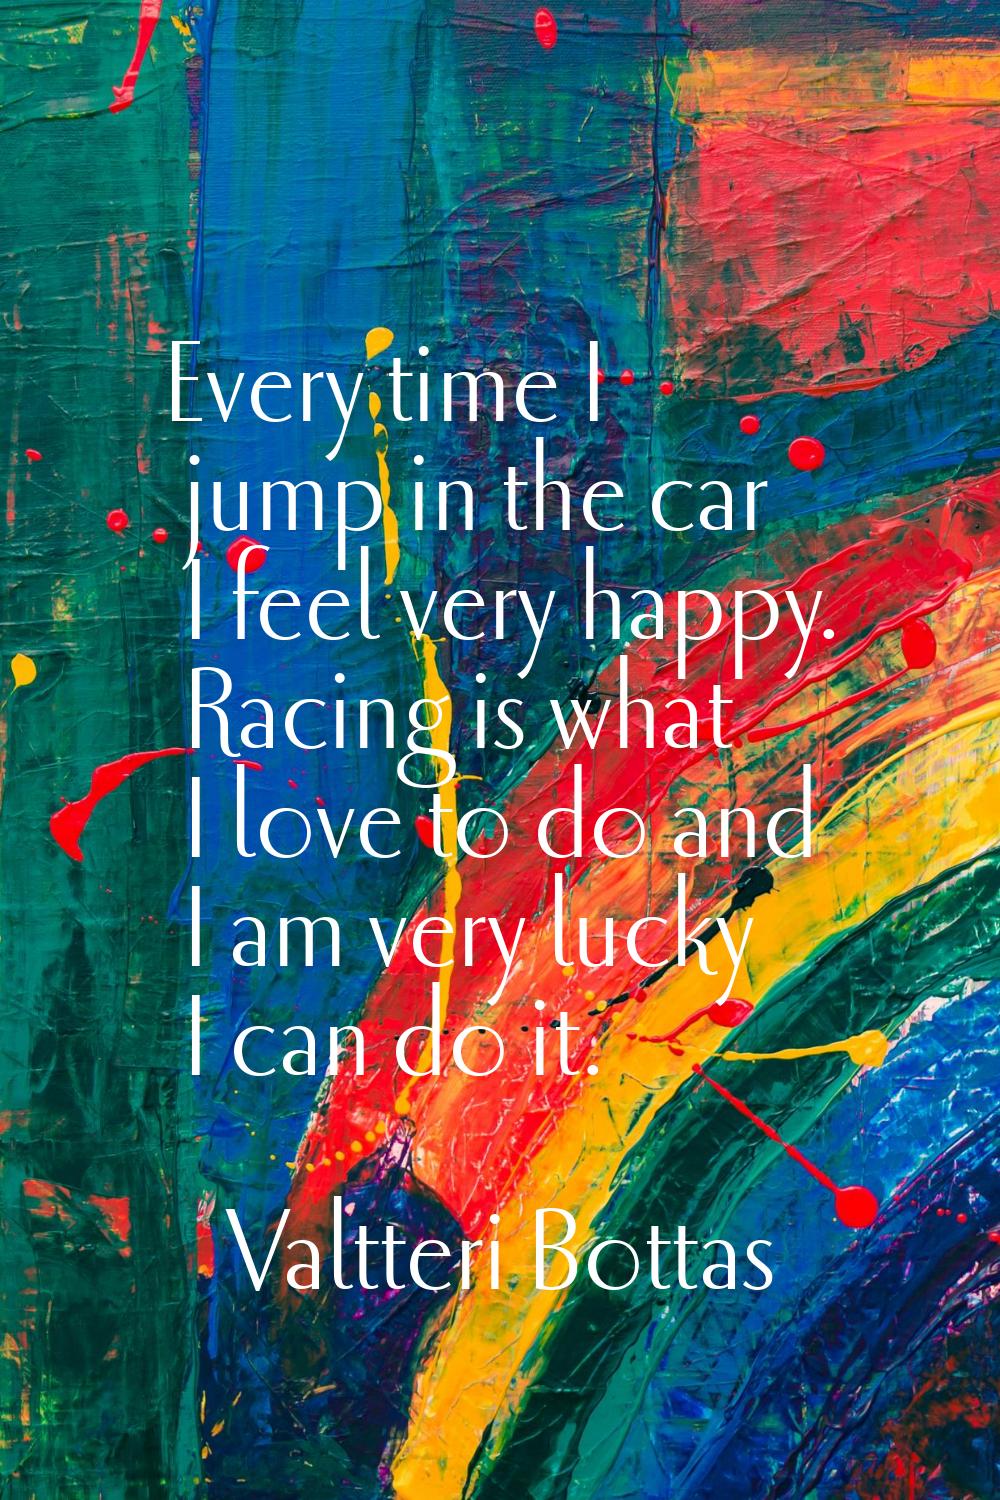 Every time I jump in the car I feel very happy. Racing is what I love to do and I am very lucky I c